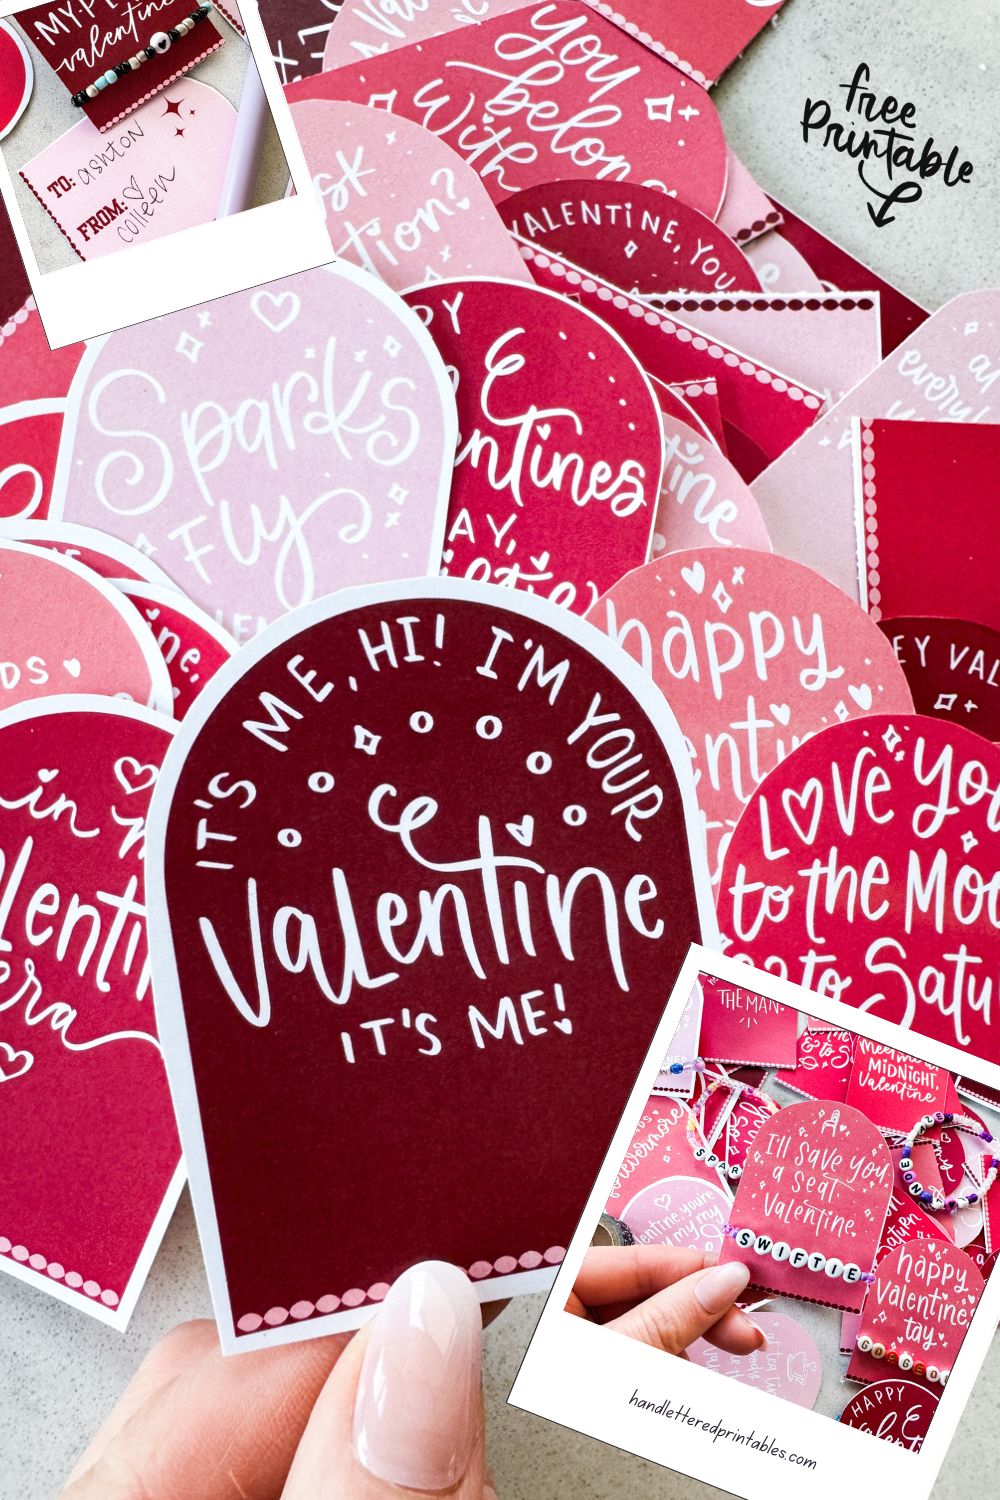 taylor swift themed valentines day cards printed and cut to size (pink and deep burgundy color with white hand lettered song lyrics) shown on marble countertop with beaded friendship bracelets. held valentine reads: it's me, hi! i'm your valentine, it's me! image overlay shows 'i'll save you a seat, valentine' with 'swiftie' friendship bracelet other image overlay shows reverse of valentines with space for to and from text overlay reads: free printable